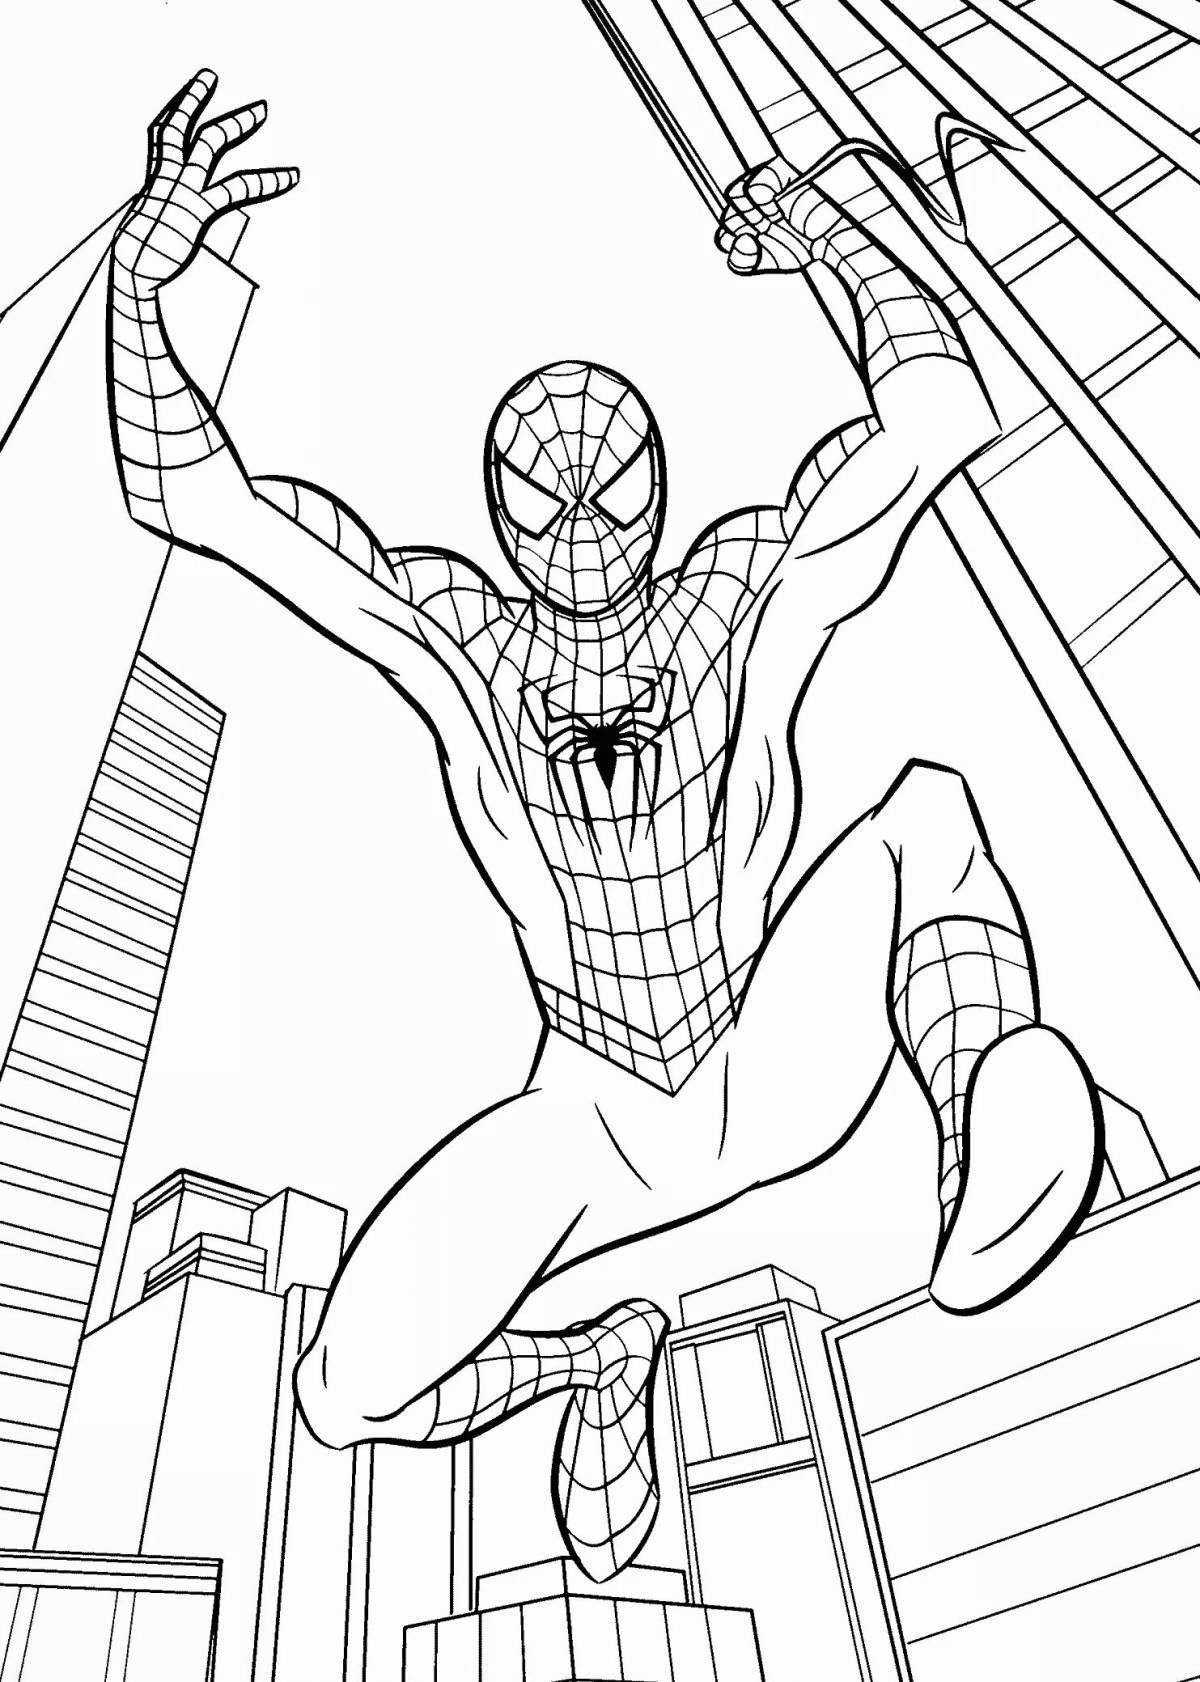 Spiderman colorful coloring game